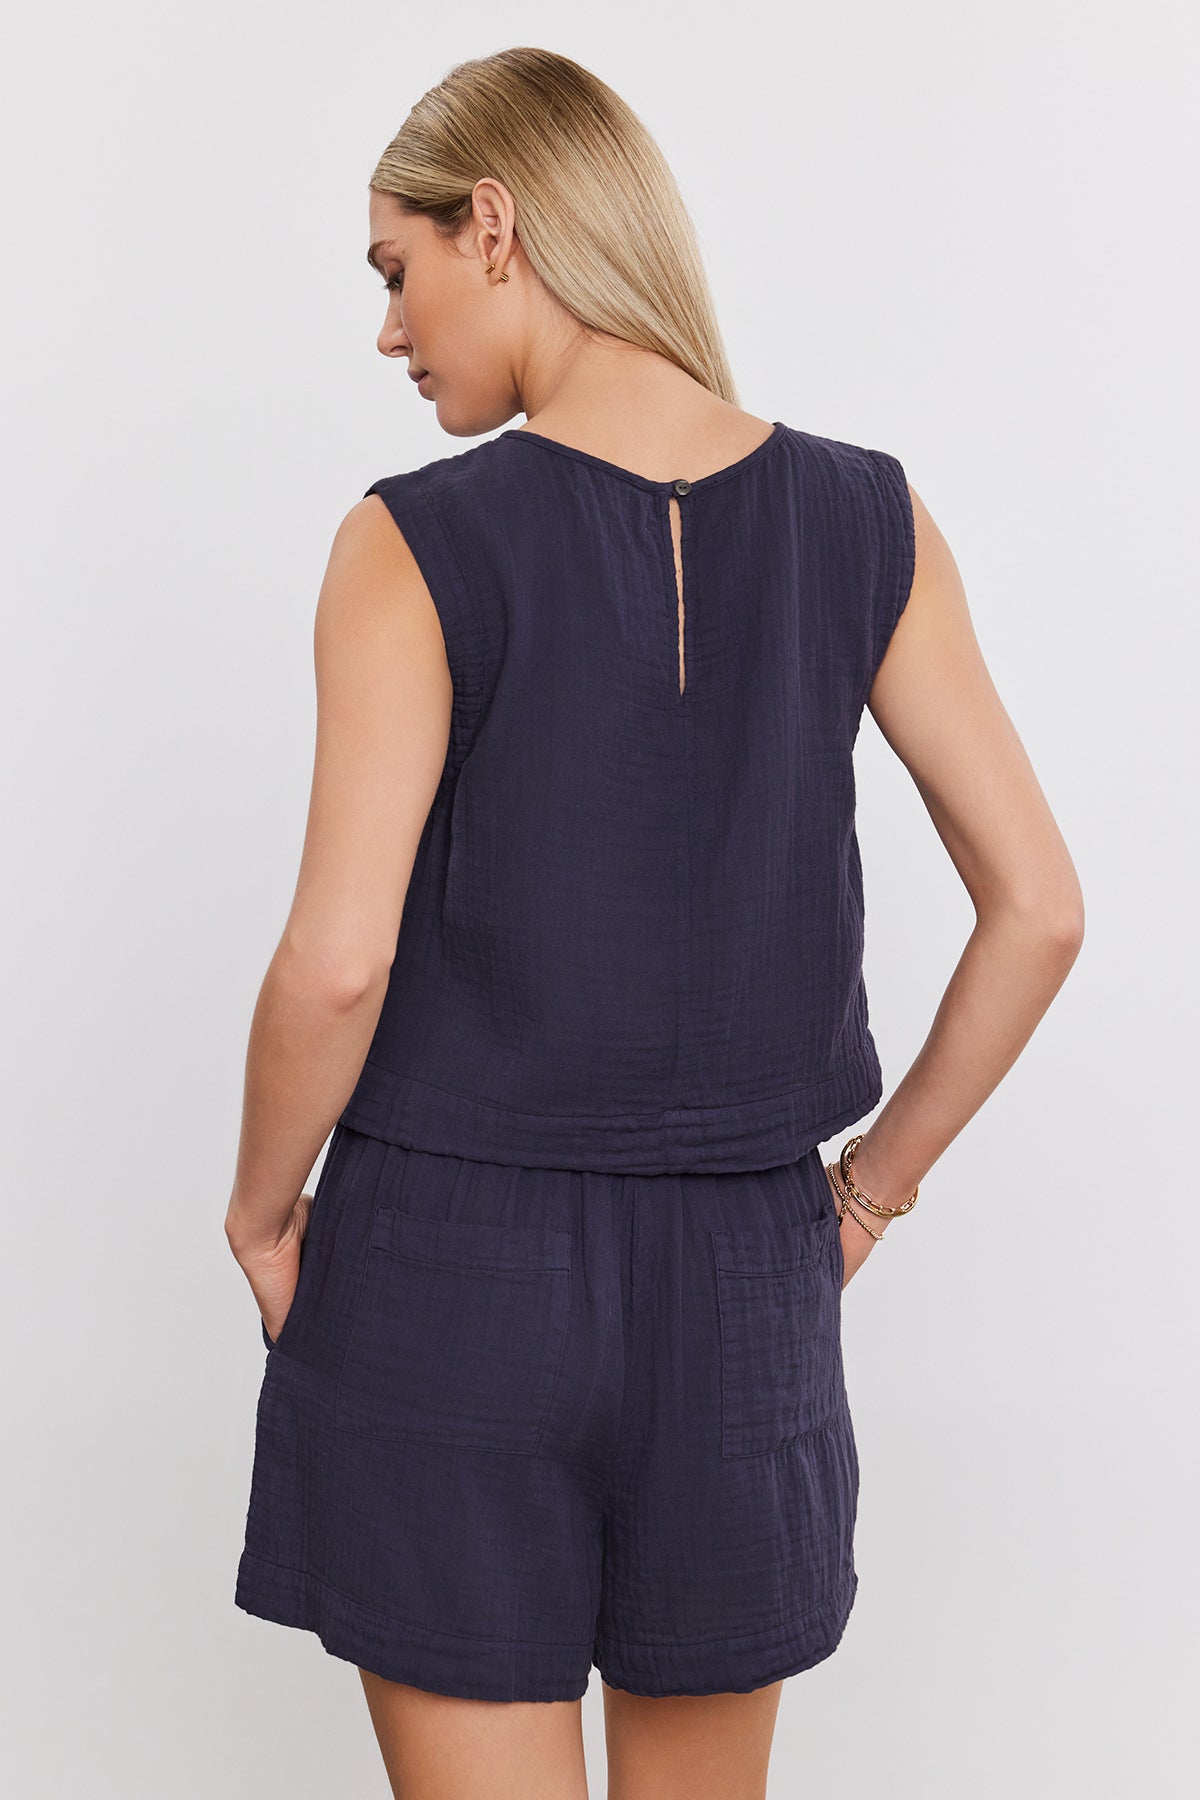   Woman wearing the AUBREN COTTON GAUZE TANK TOP by Velvet by Graham & Spencer, a sleeveless, navy blue top and matching shorts, viewed from the back. Made of airy cotton gauze, the ensemble features a cropped silhouette that adds to its casual charm. She has her hands in her pockets. 